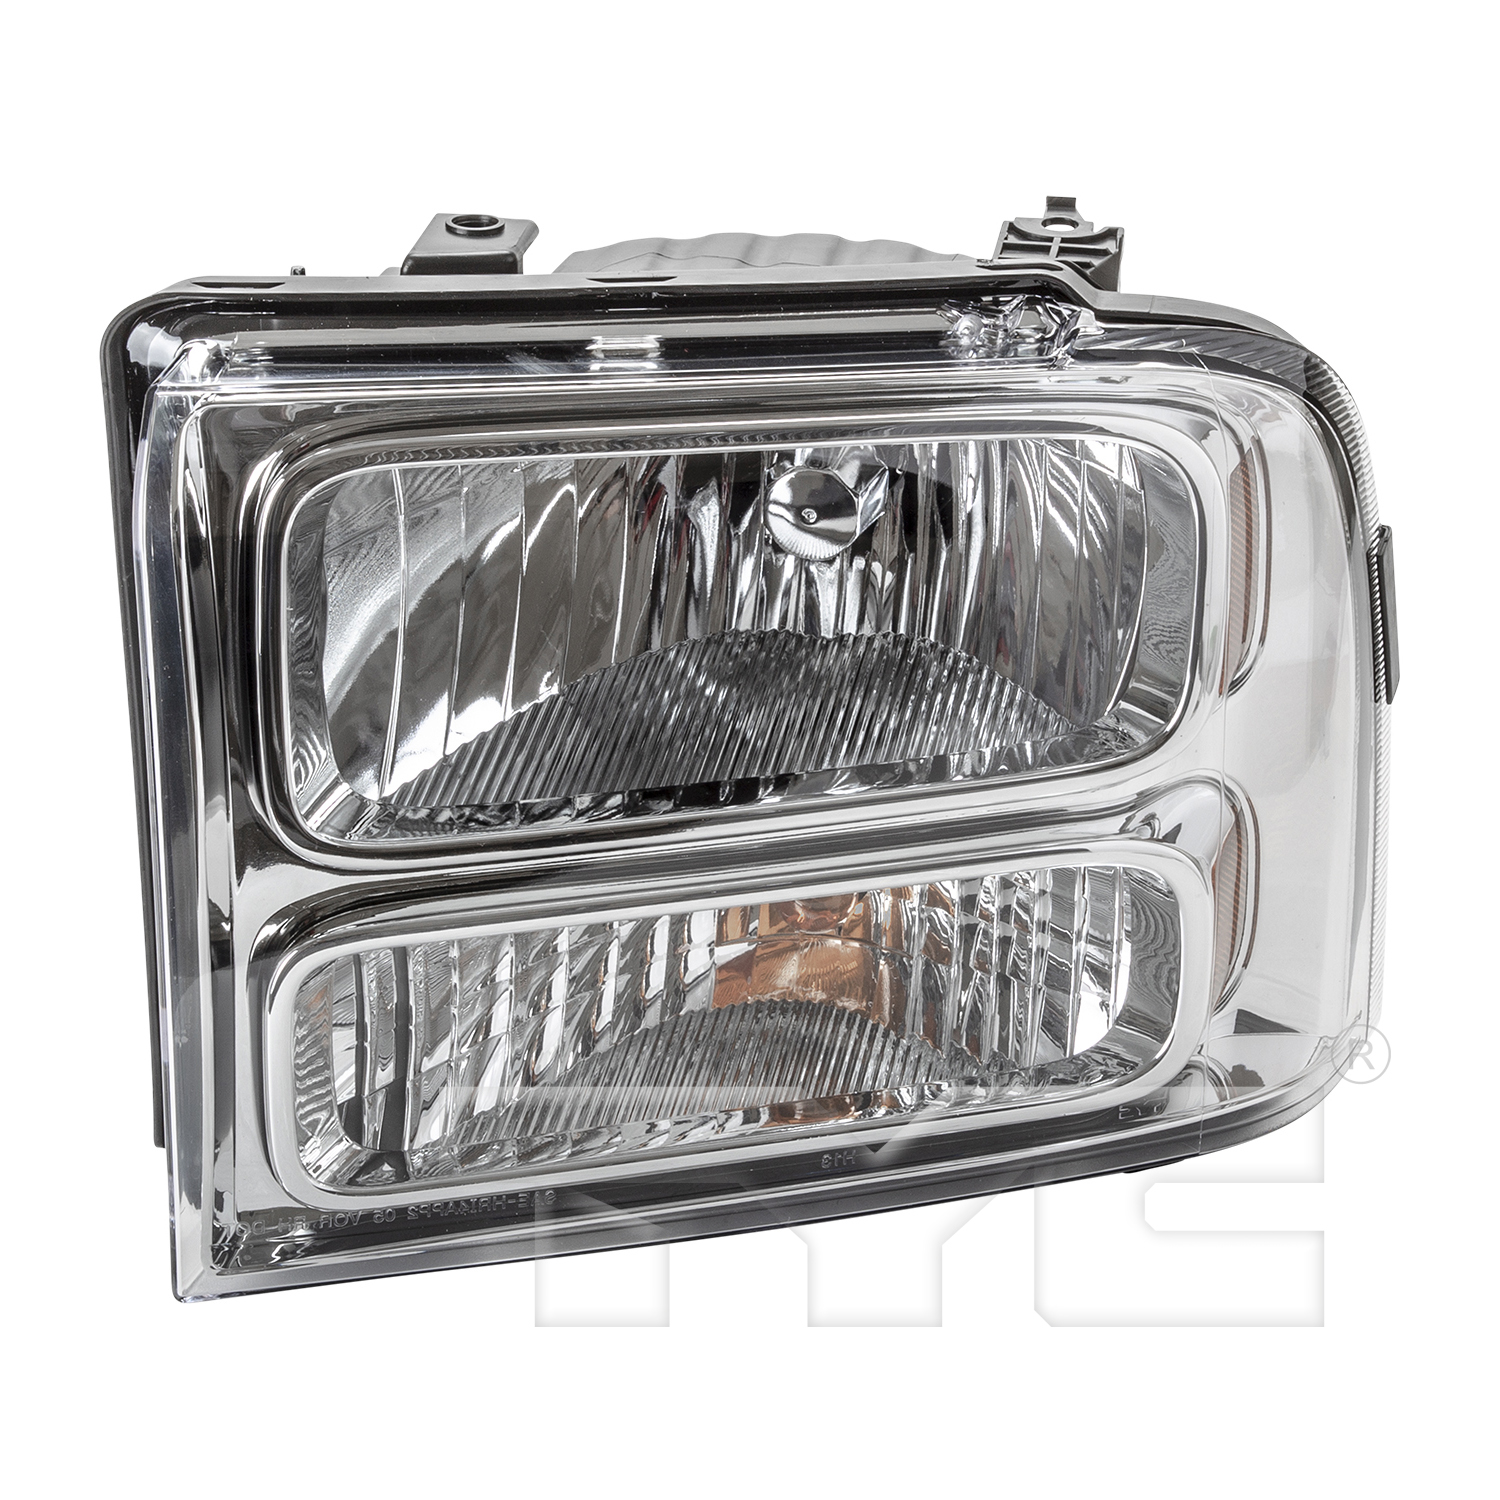 Aftermarket HEADLIGHTS for FORD - EXCURSION, EXCURSION,05-05,LT Headlamp assy composite